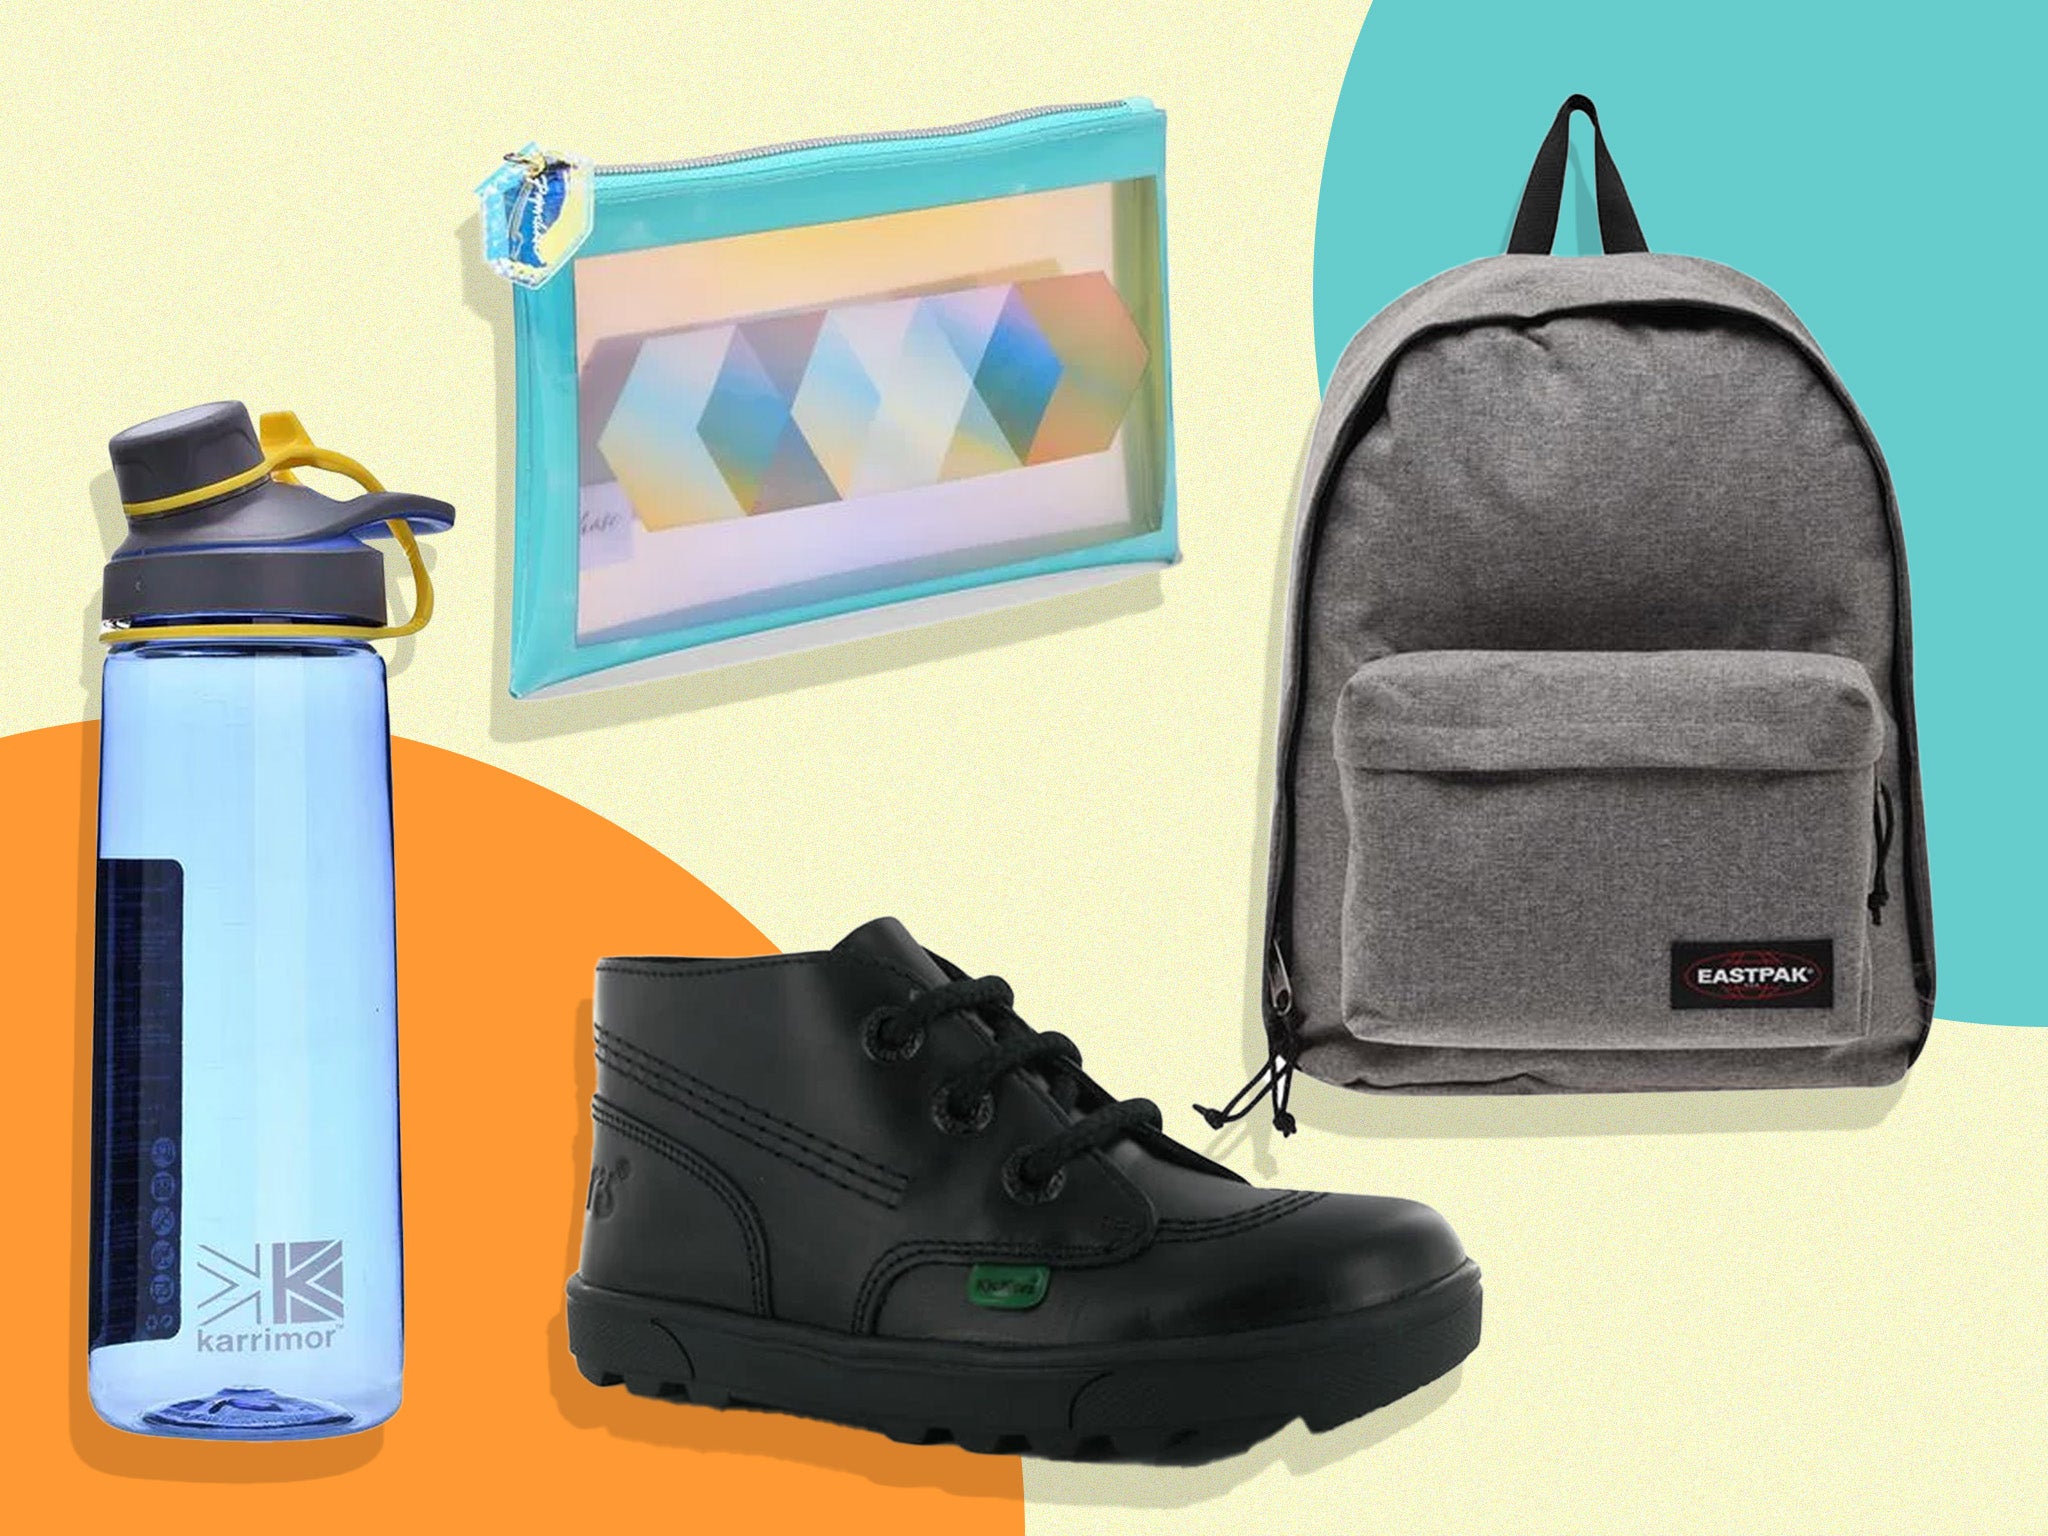 Beat the back to school rush with deals from John Lewis, Sports Direct and more